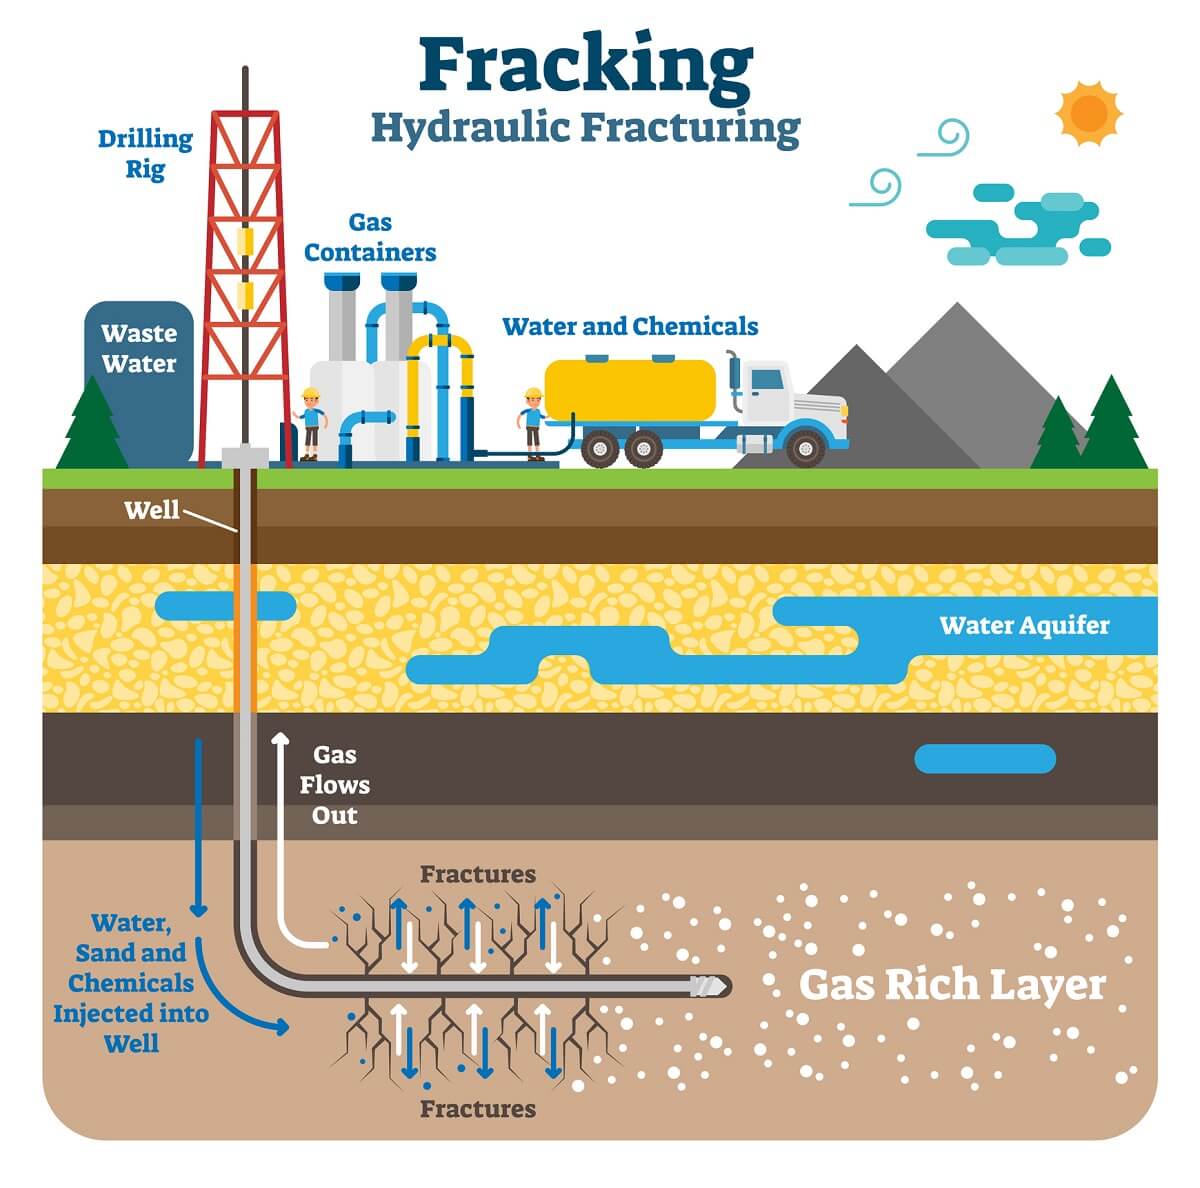 Hydraulic fracturing schematic illustration, showing the fracking process with machinery equipment, drilling rig and gas rich ground layers.